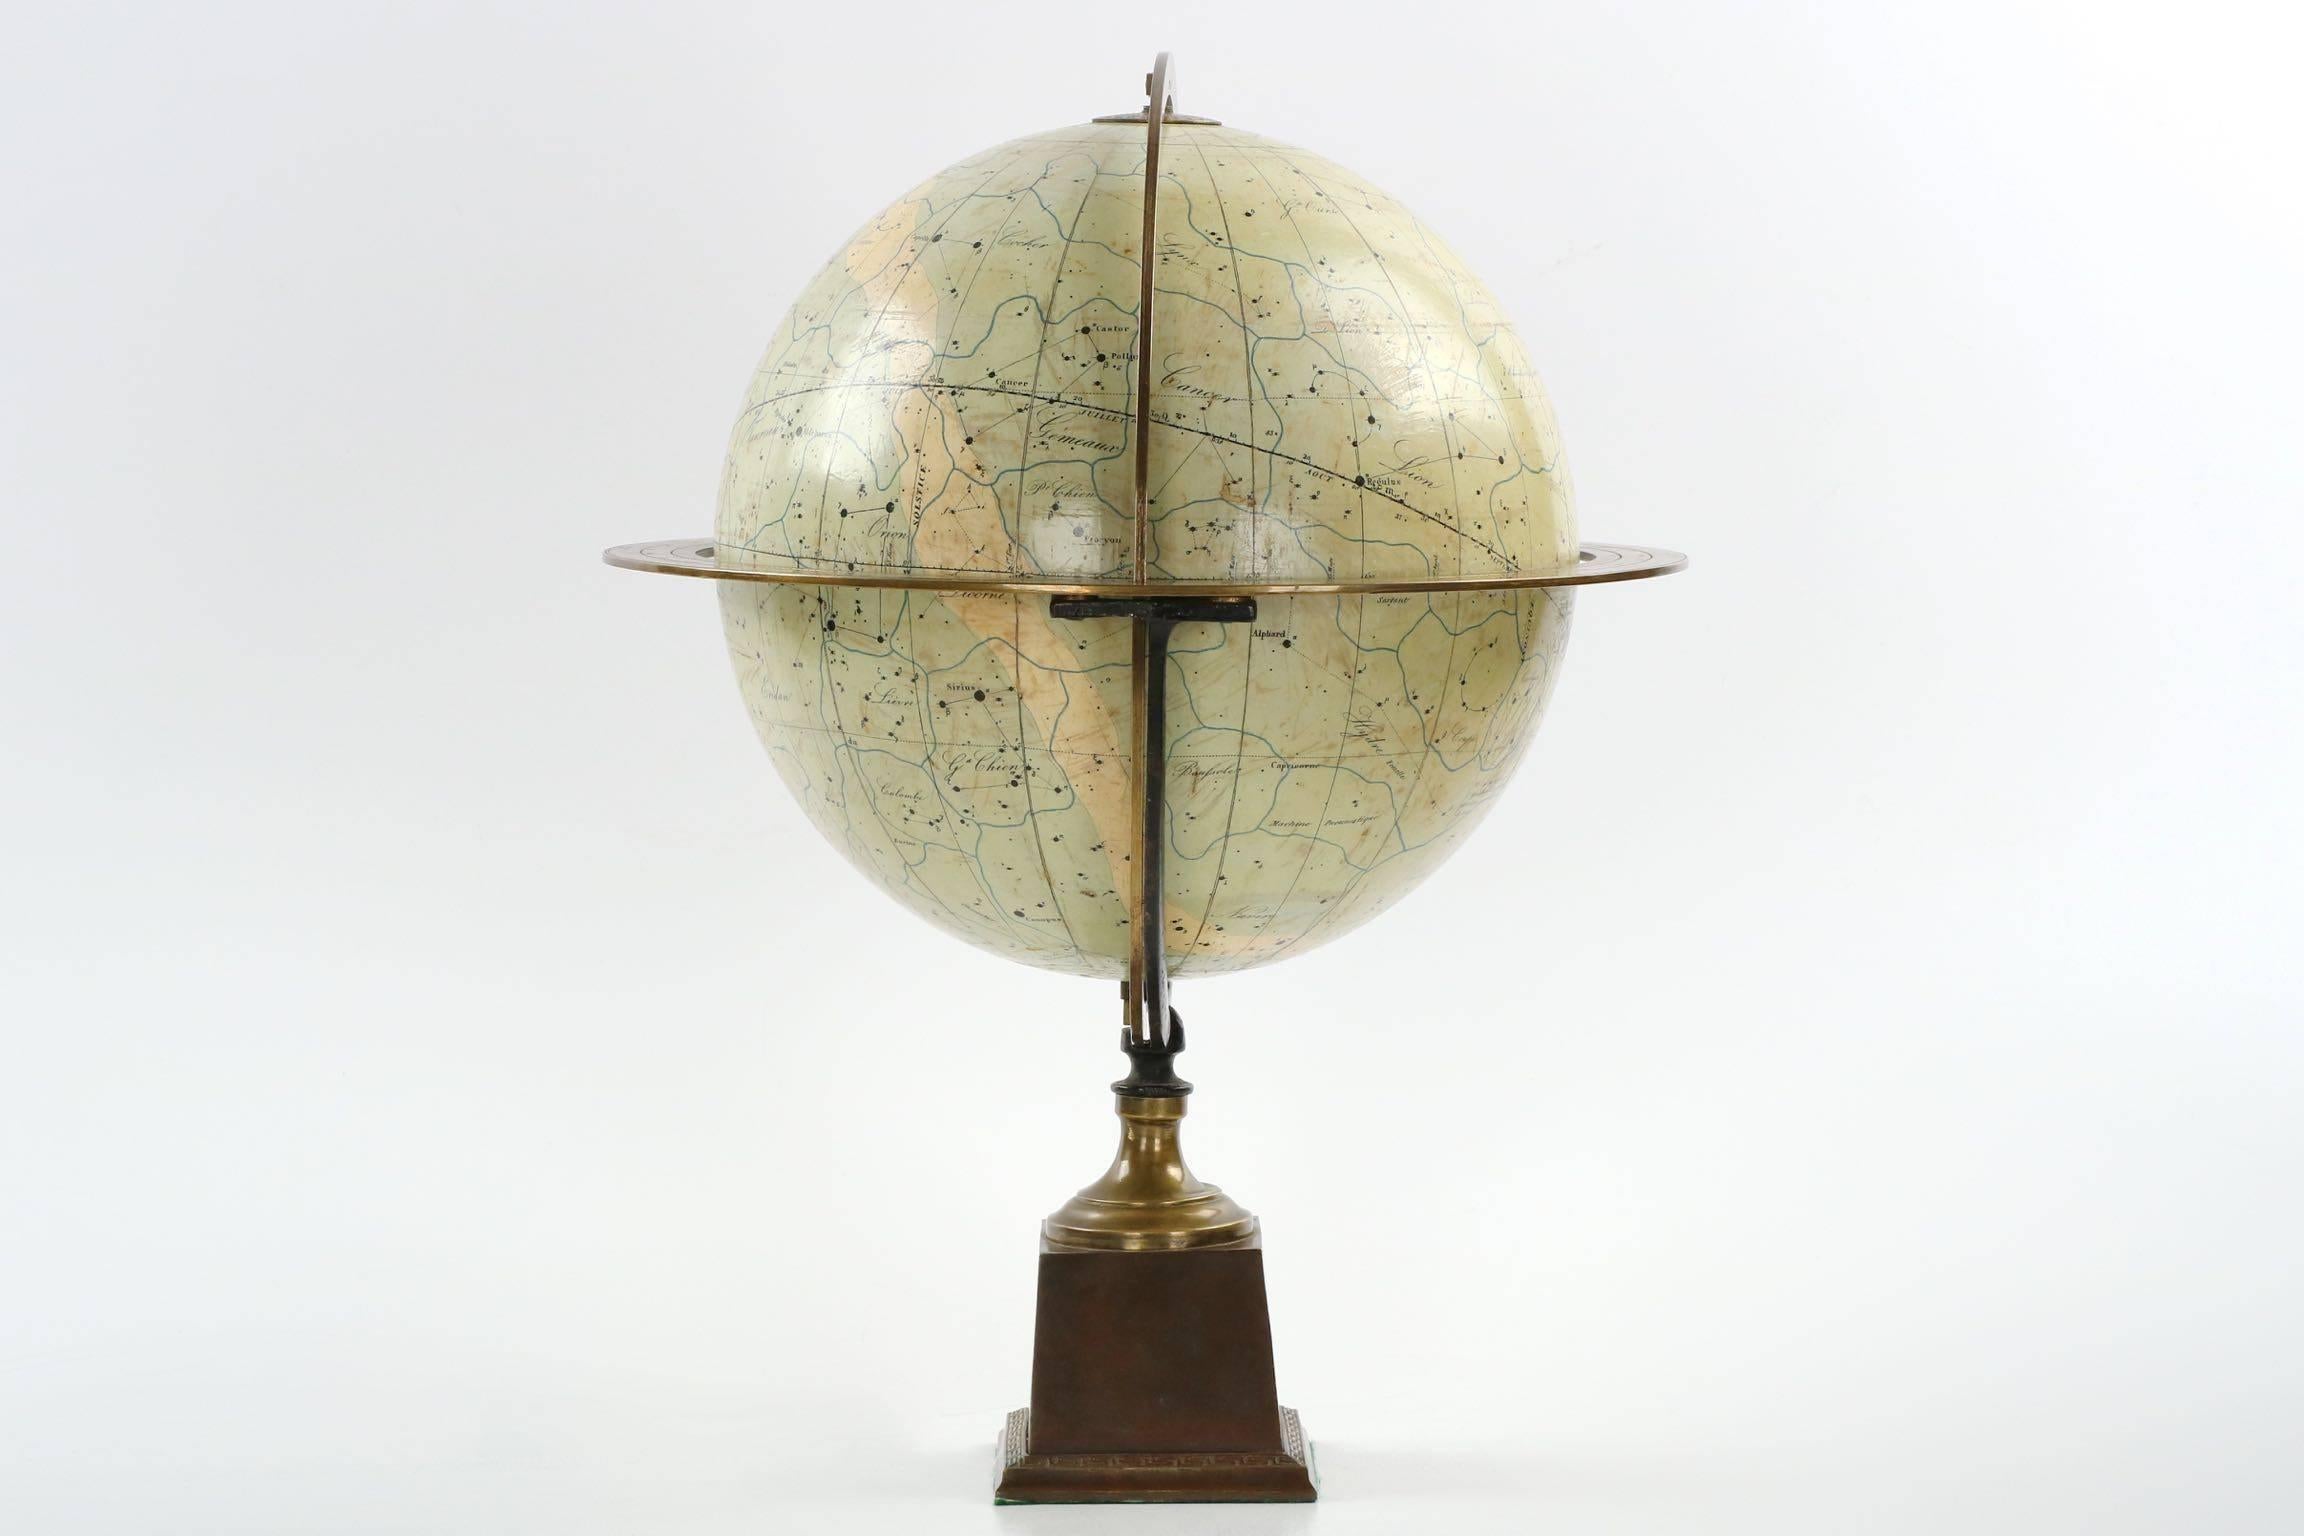 This fine celestial table globe is from the last quarter of the 19th century and is marked Dressé par Ch. Dien, Paris, Ele. Bertaux Editeur, 25 Rue Serpente Paris. The globe is composed of twelve printed gores divided by an equator measuring roman